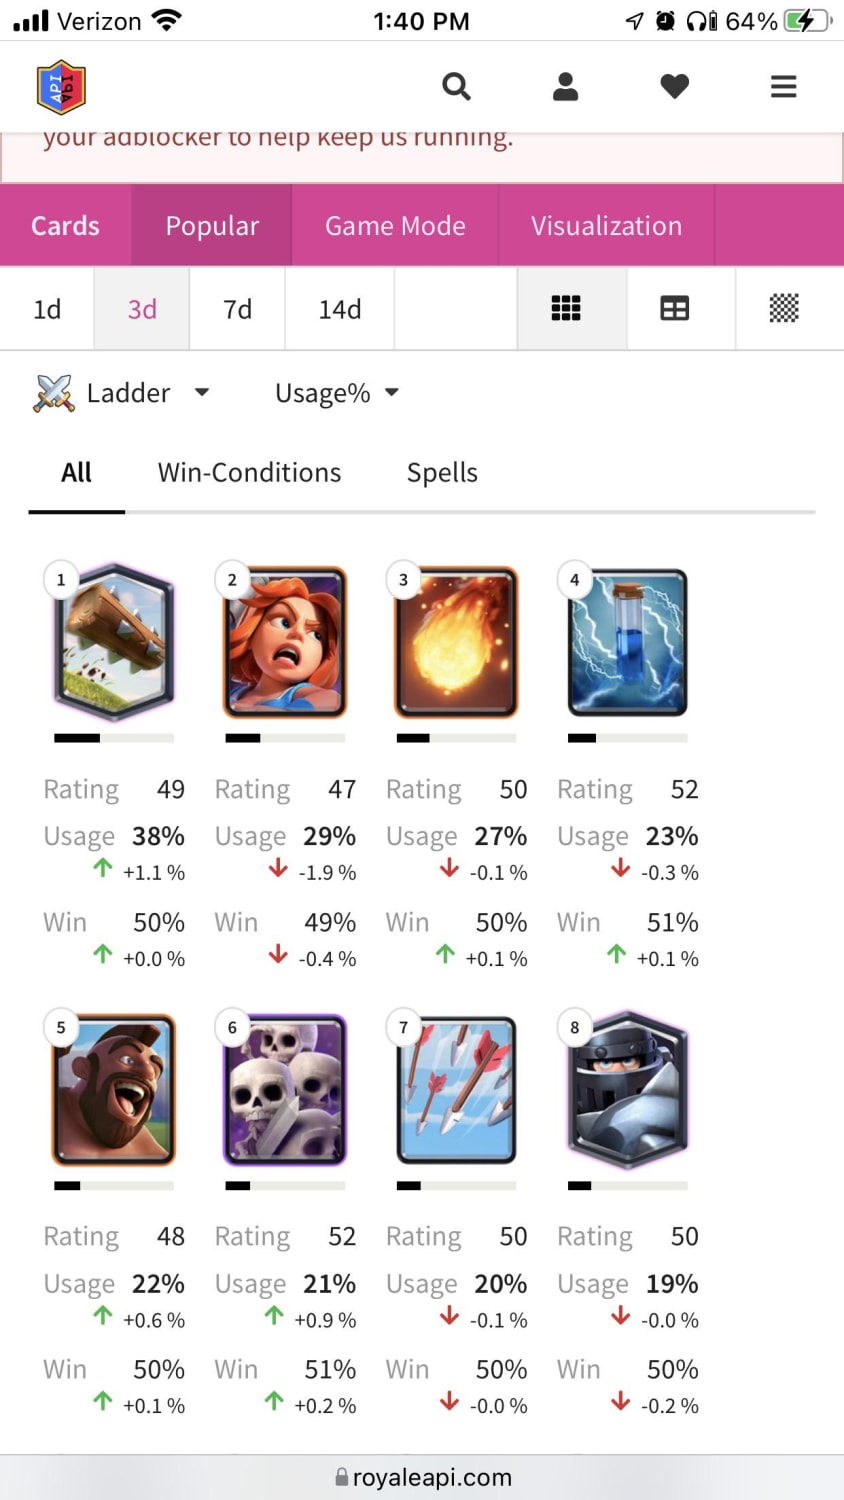 Congrats Supercell! You dropped usage by 0%. Nailed it